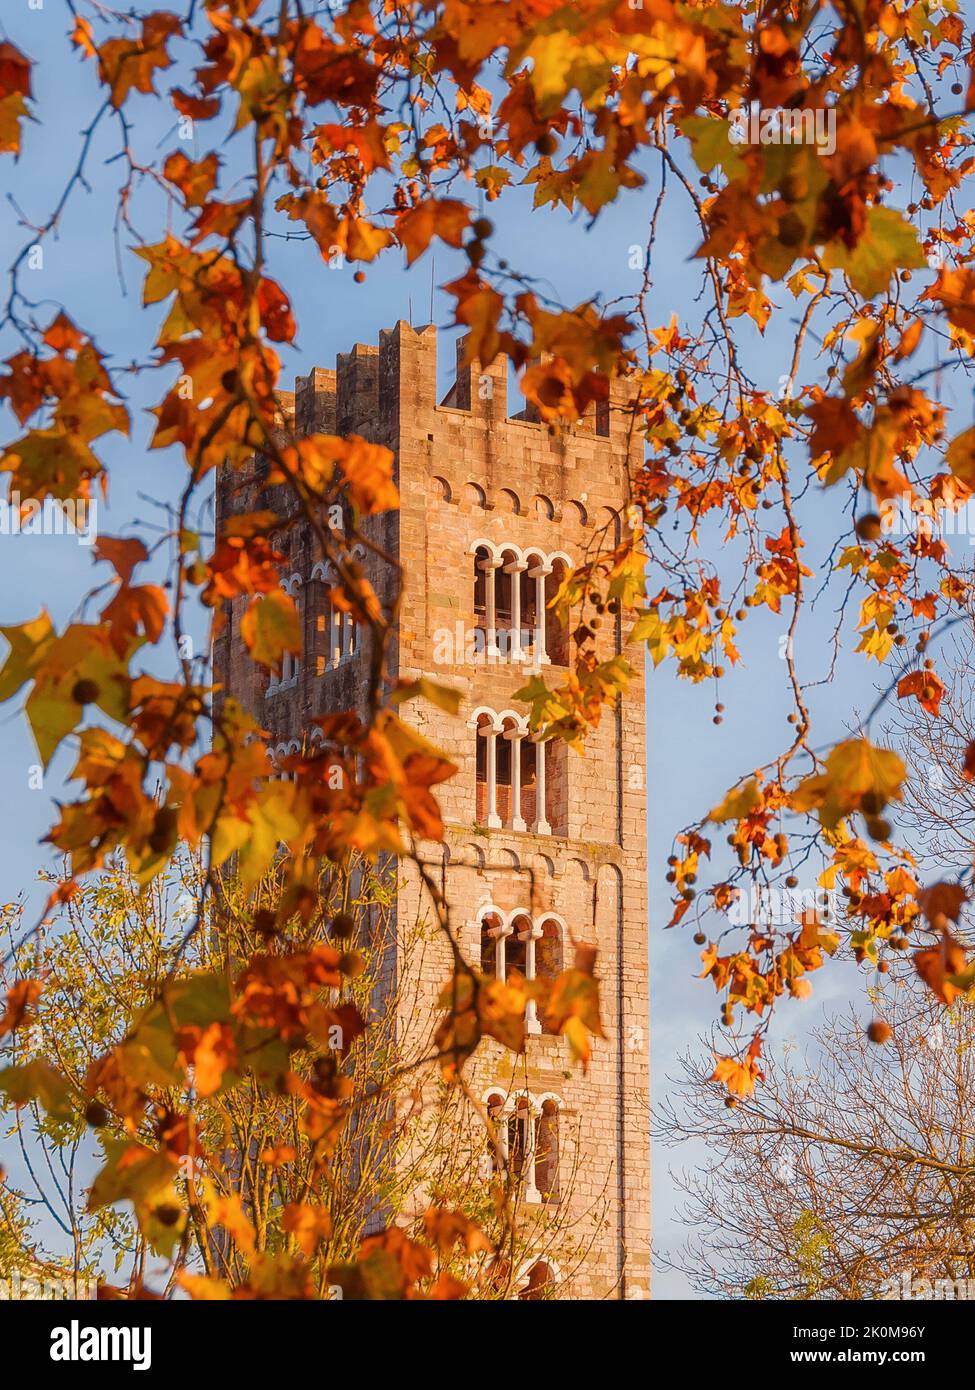 Autumn and foliage in Lucca. Church of St Fredianus medieval bell tower among sycamore autumnal red, orange and brown leaves Stock Photo